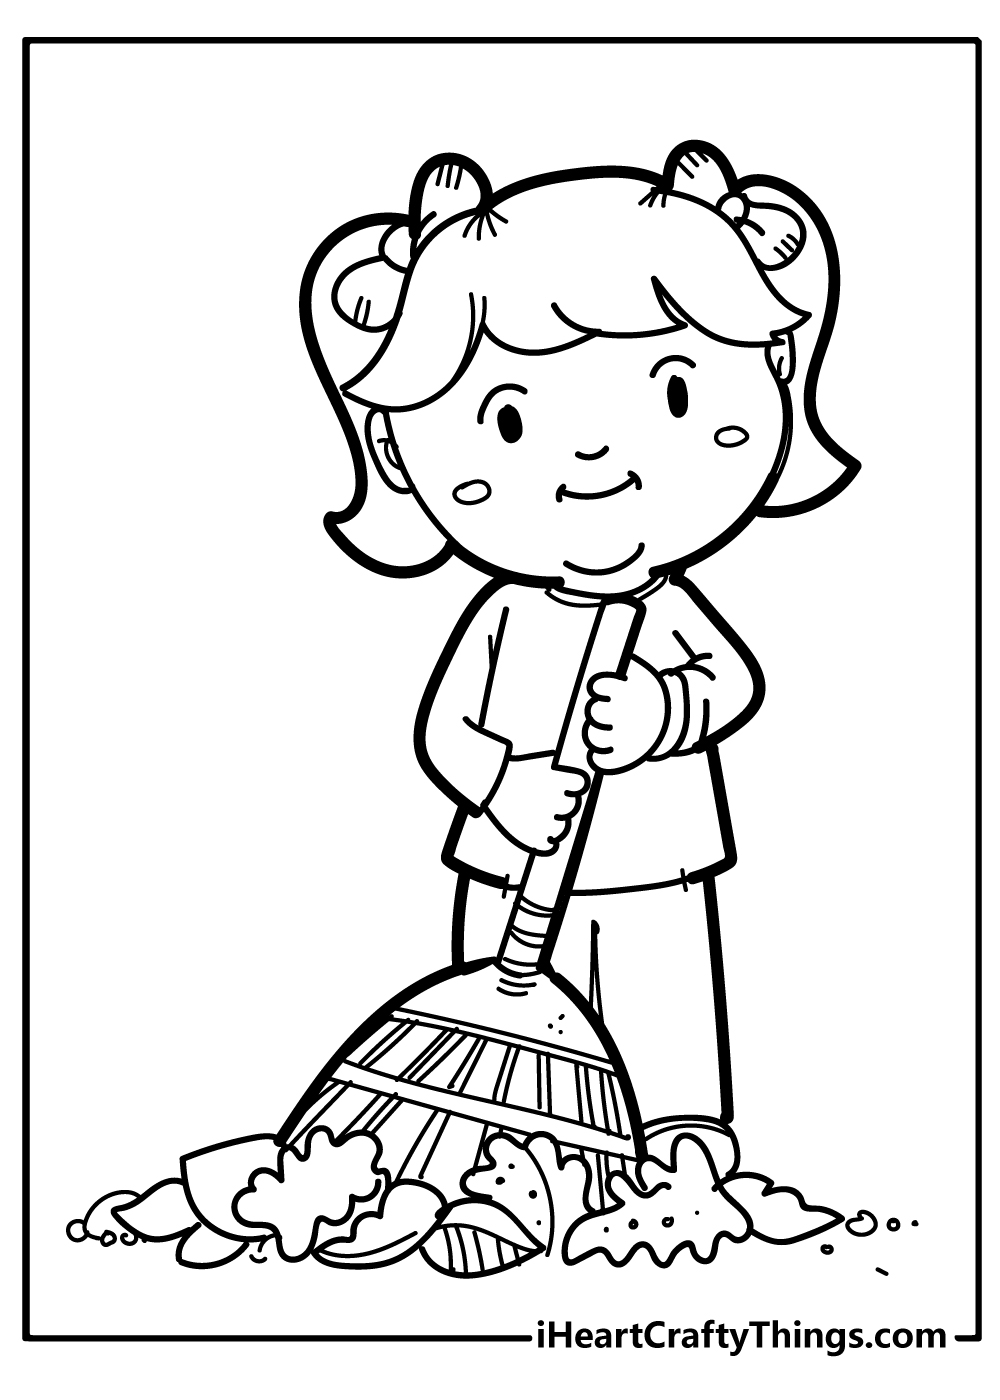 Fall Coloring Pages for kids free download